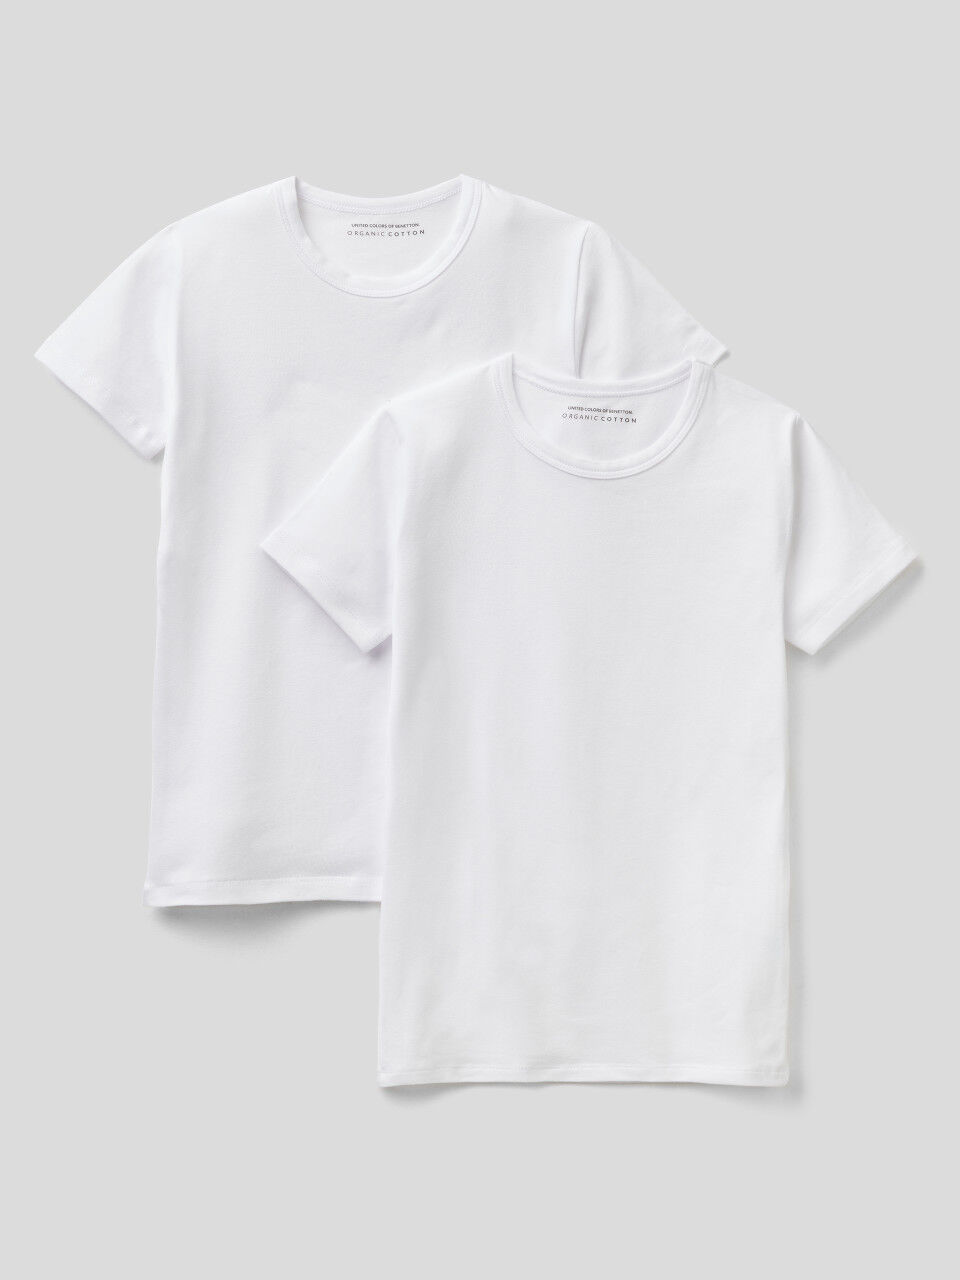 Two white t-shirts in organic stretch cotton